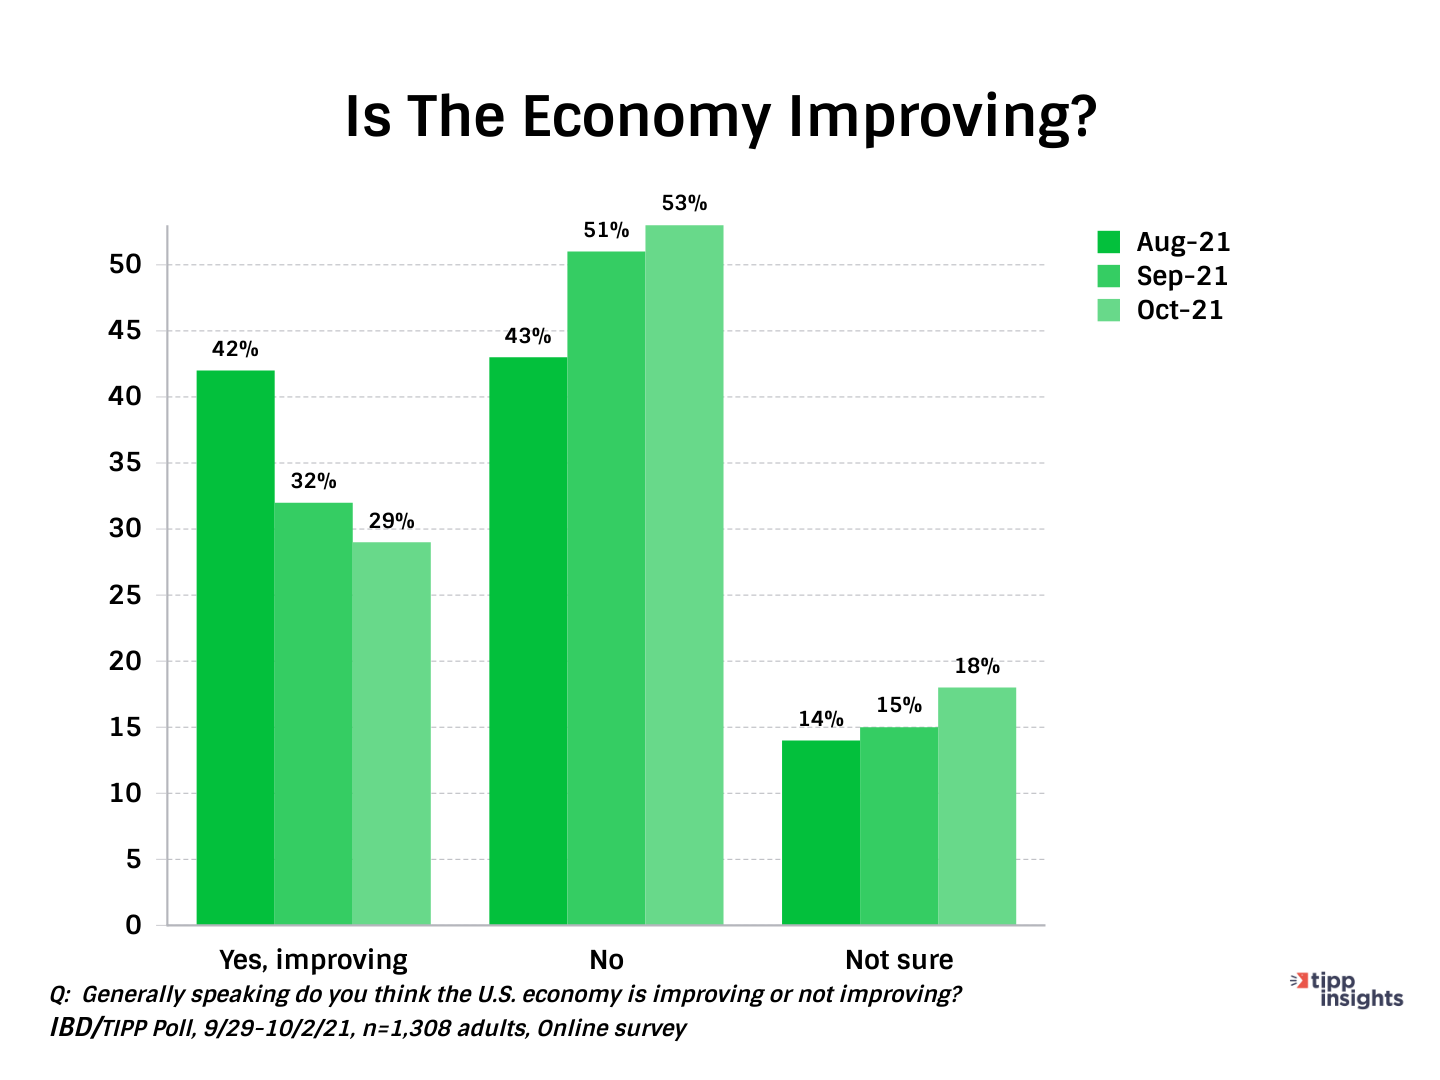 IBD/TIPP Economic Optimism Index: Americans and whether they think the Economy is Improving